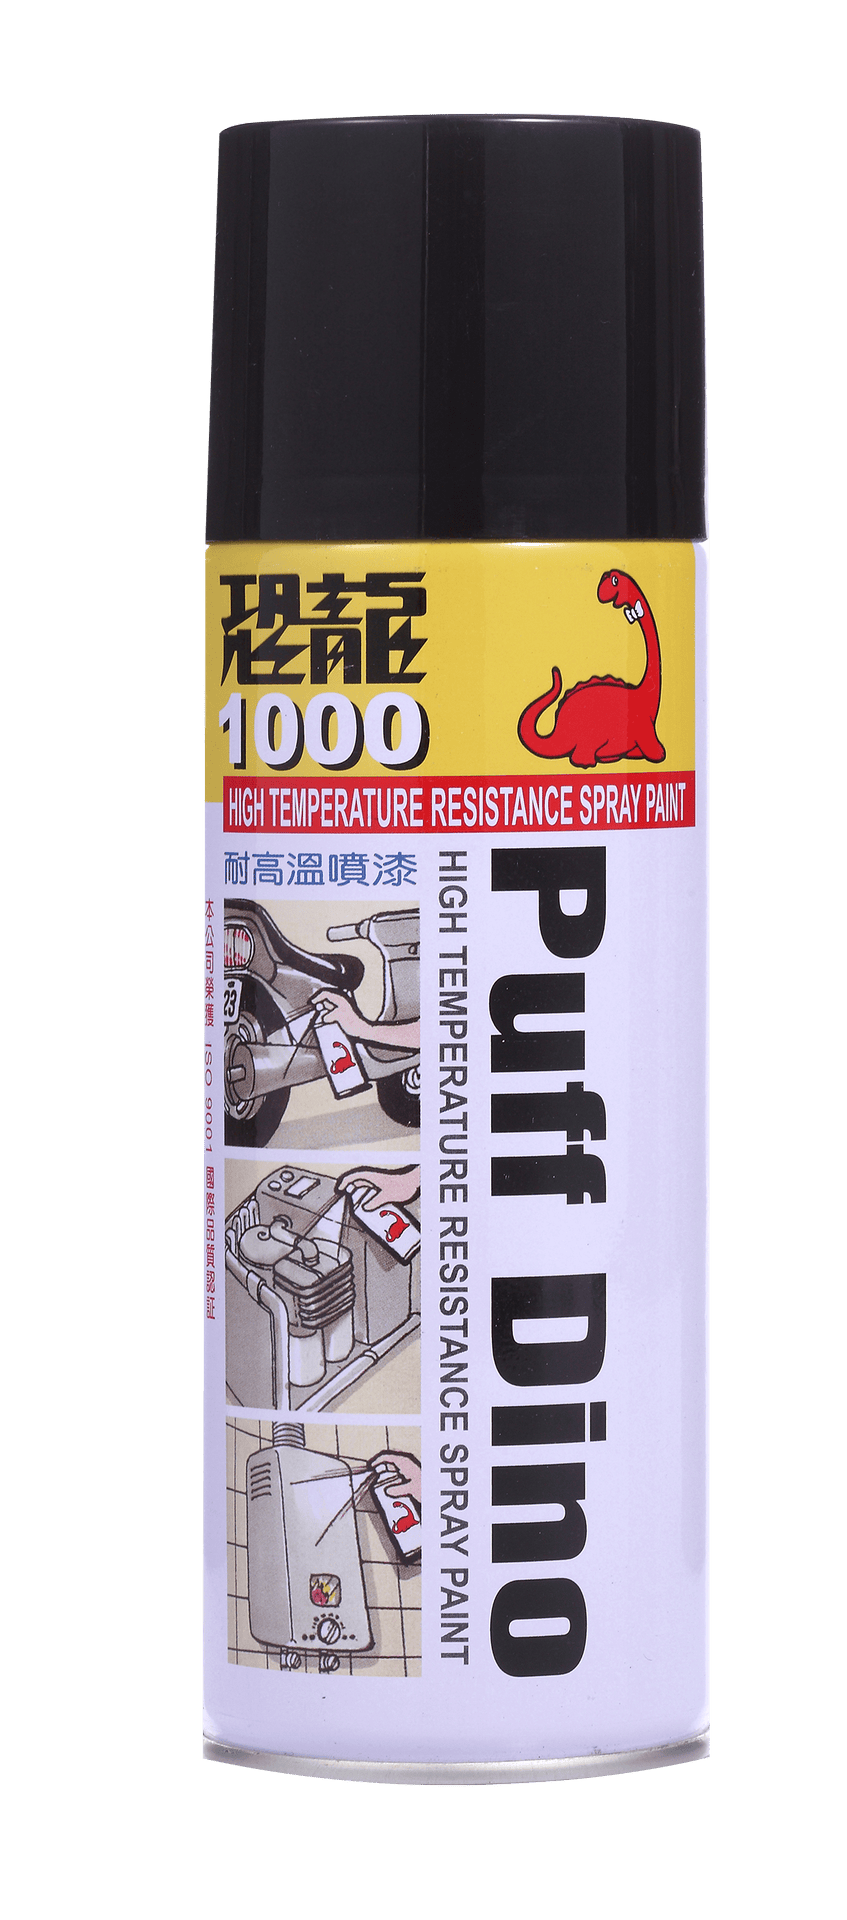 PUFF DINO HIGH TEMPERATURE RESISTANCE SPRAY PAINT